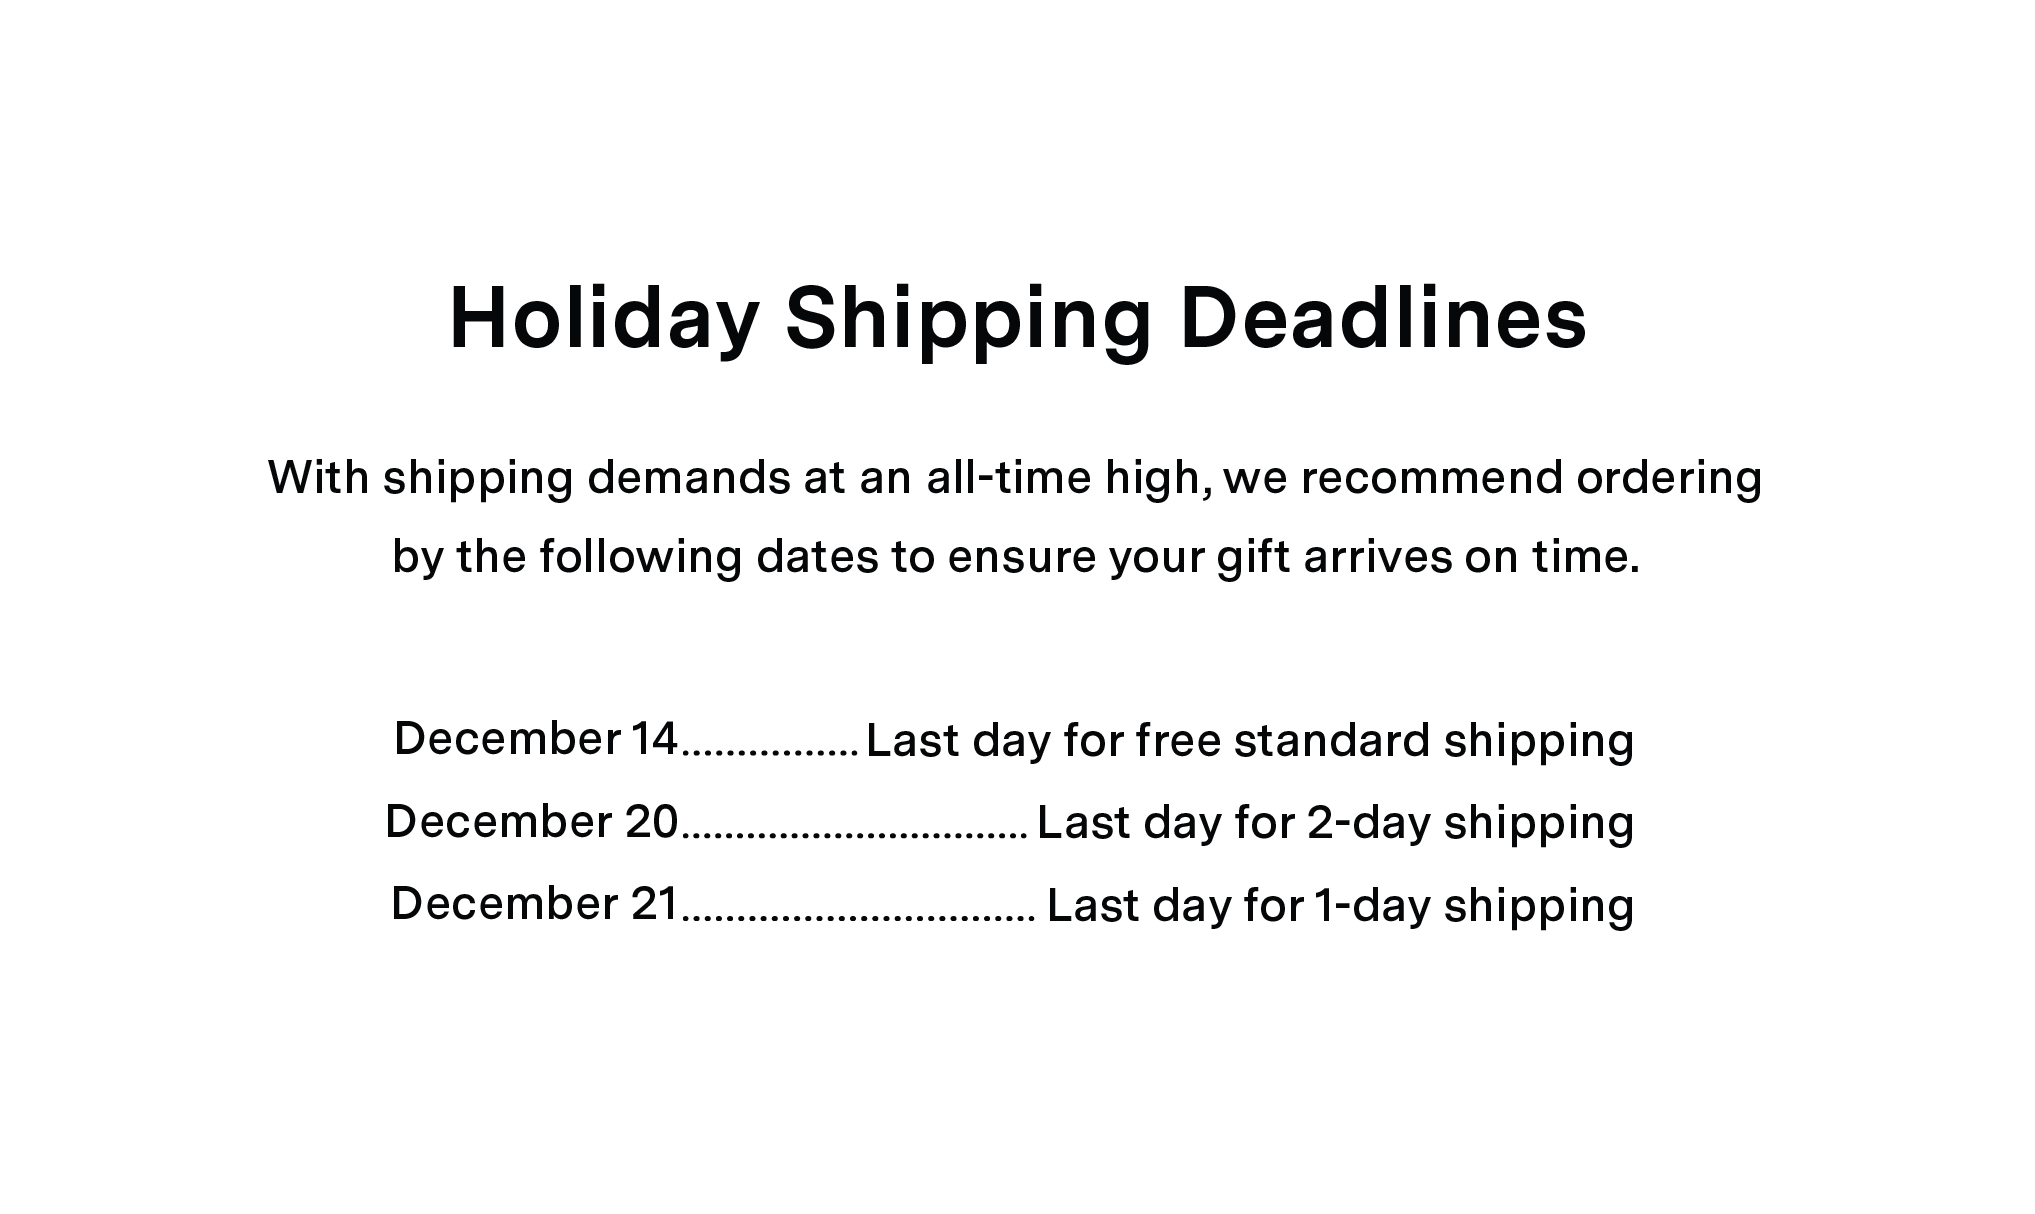 Holiday Shipping Deadlines: With shipping demands at an all-time high, we recommend ordering by the following dates to ensure your gift arrives on time. December 14 = Last day for standard shipping. December 20 = Last day for 2-day shipping. December 21 = Last day for 1-day shipping.